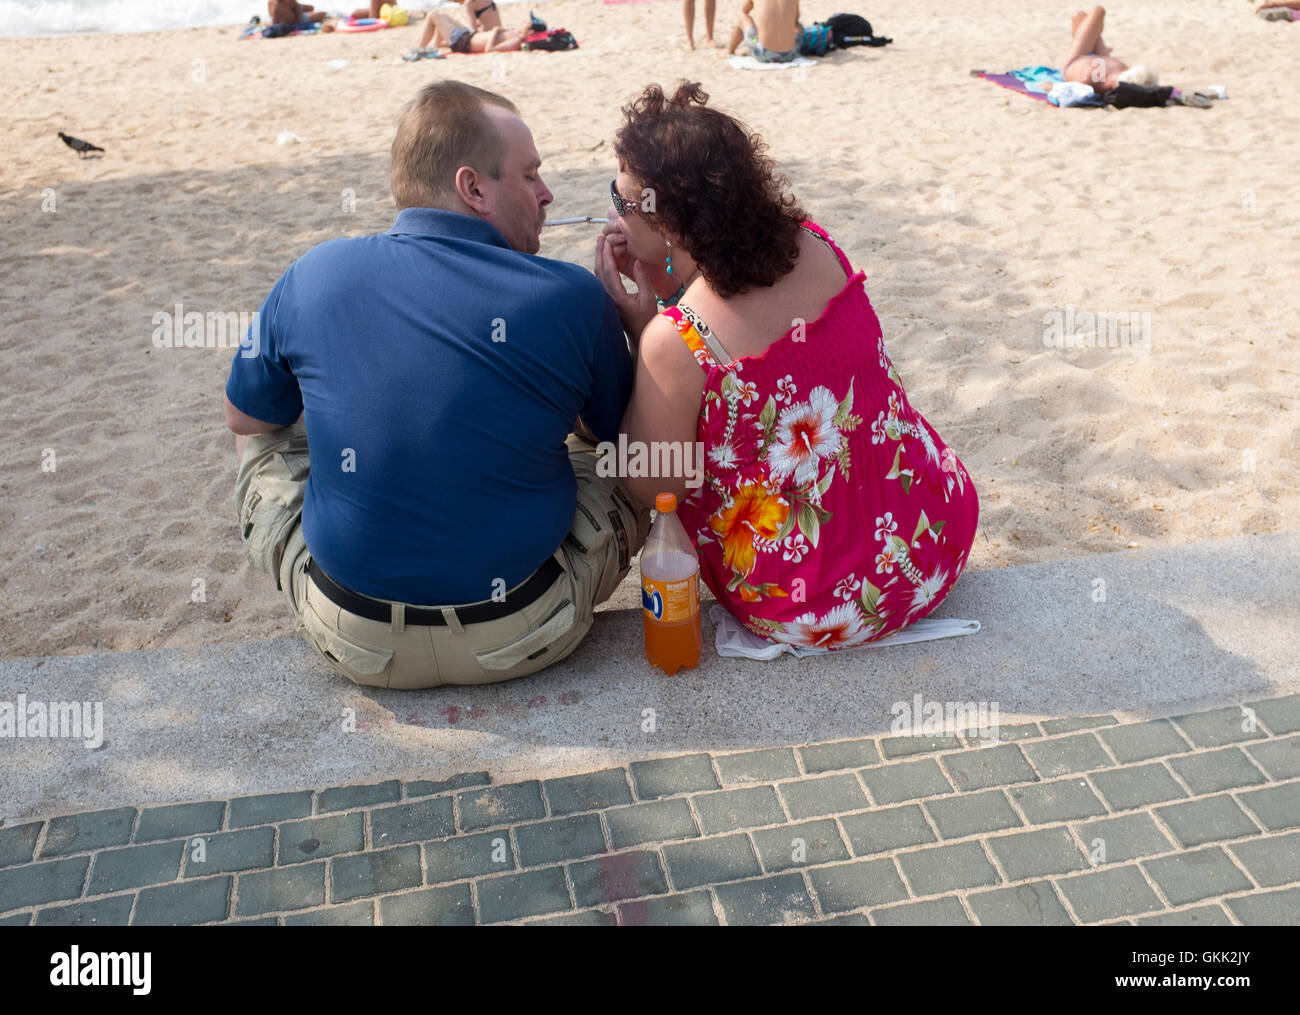 Western Holidaymakers sharing a cigarette Pattaya Beach Thailand Stock Photo